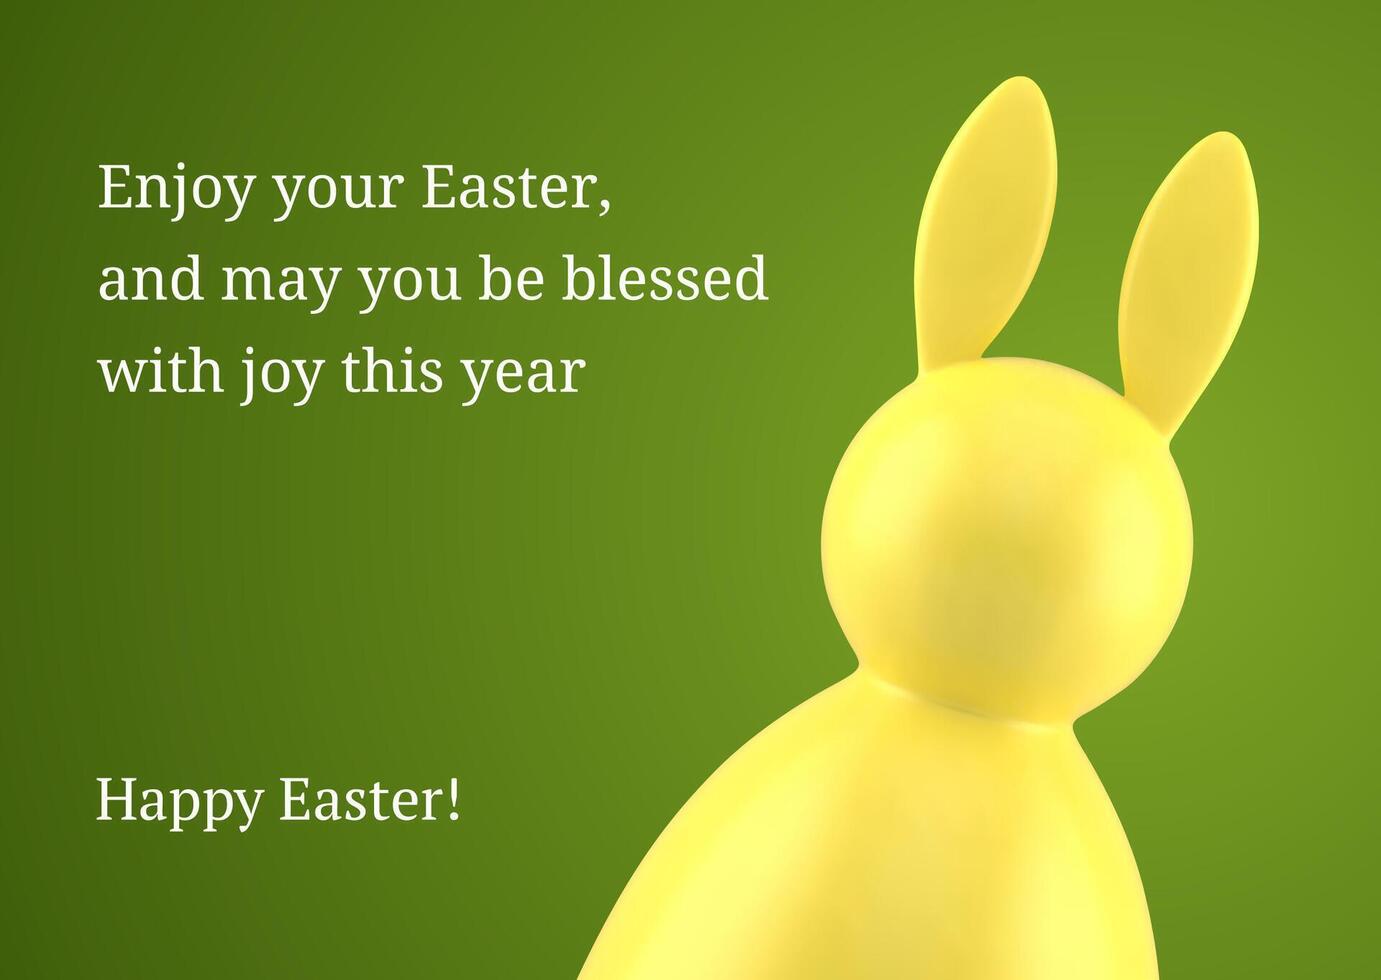 Easter bunny bauble yellow long ears character 3d greeting card design template realistic vector